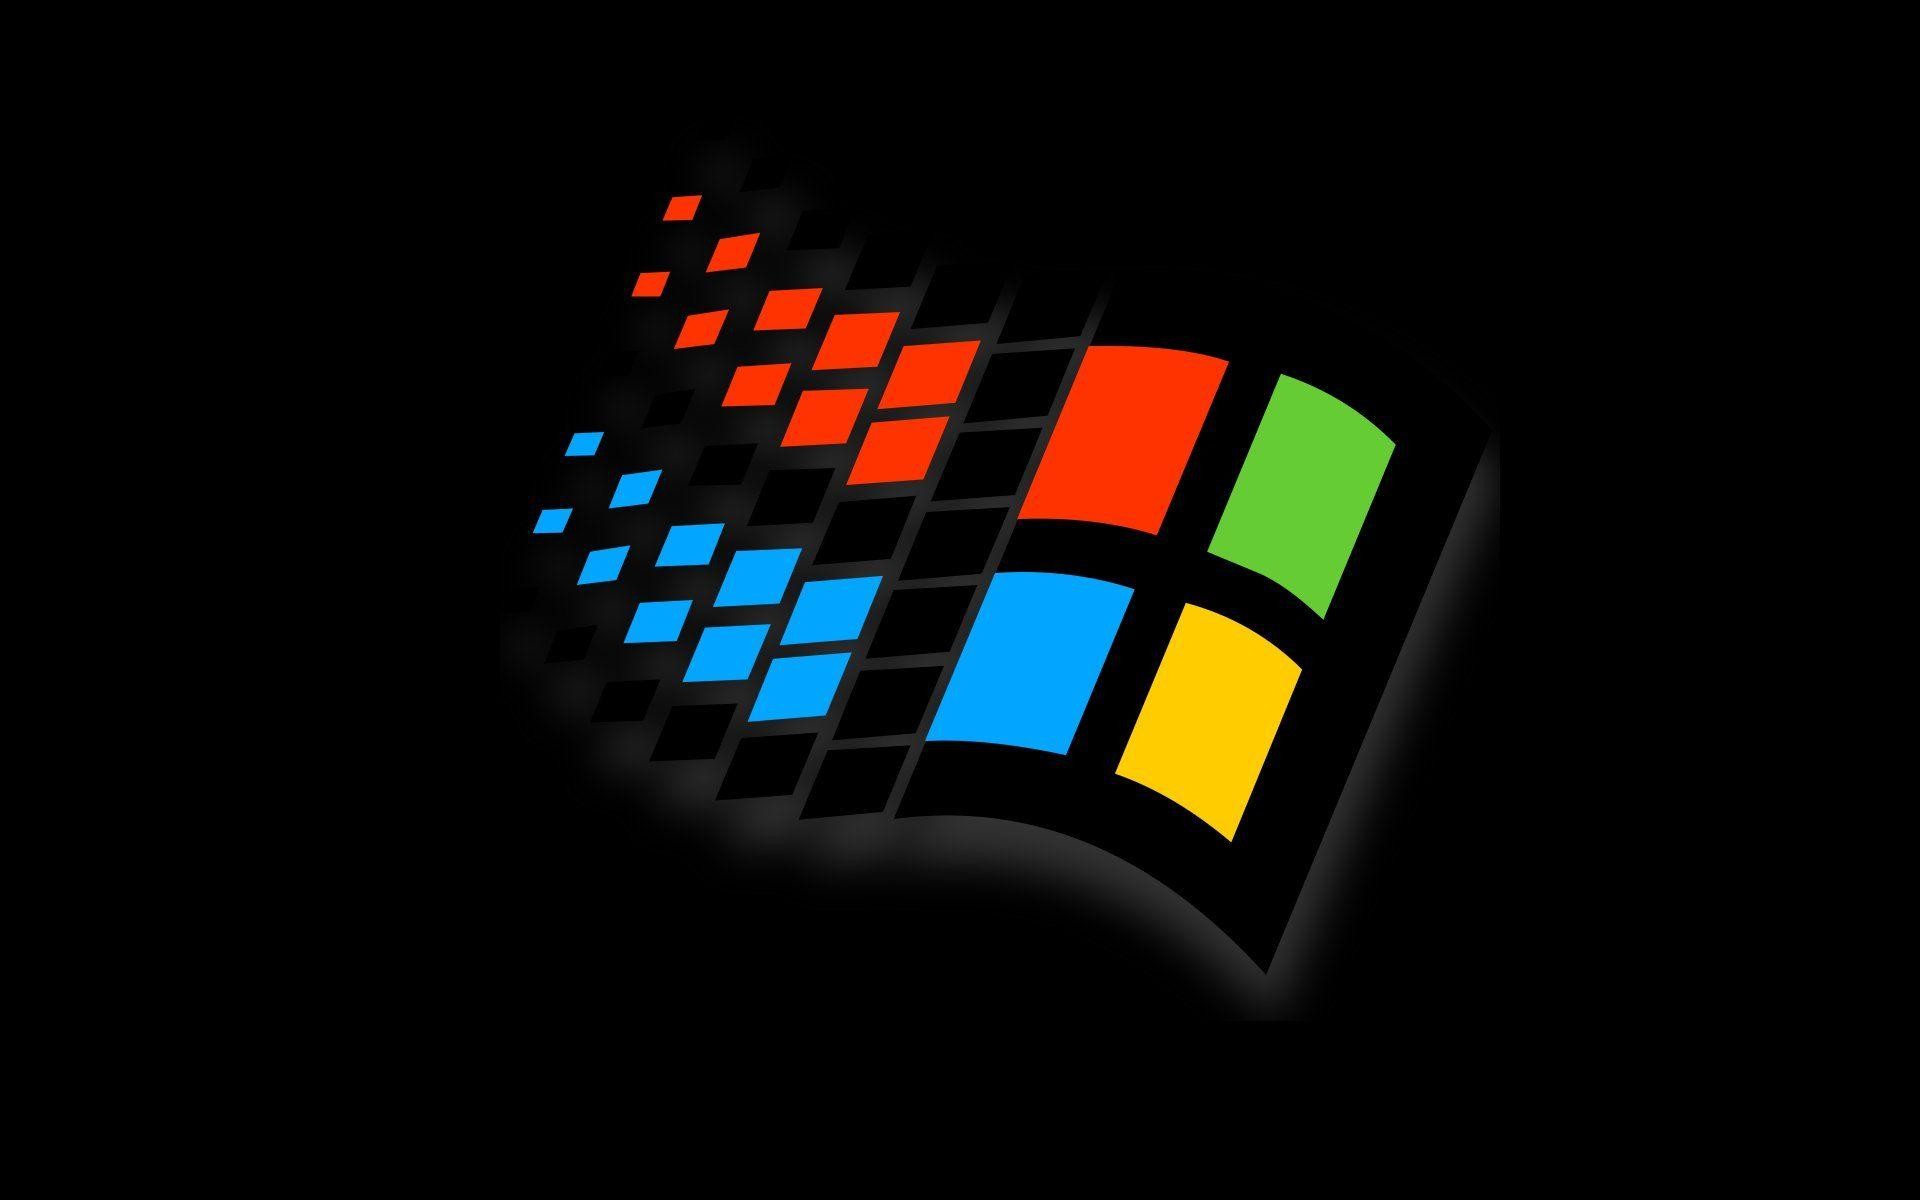 1920x1200 Wallpapers For > Classic Windows 98 Wallpaper